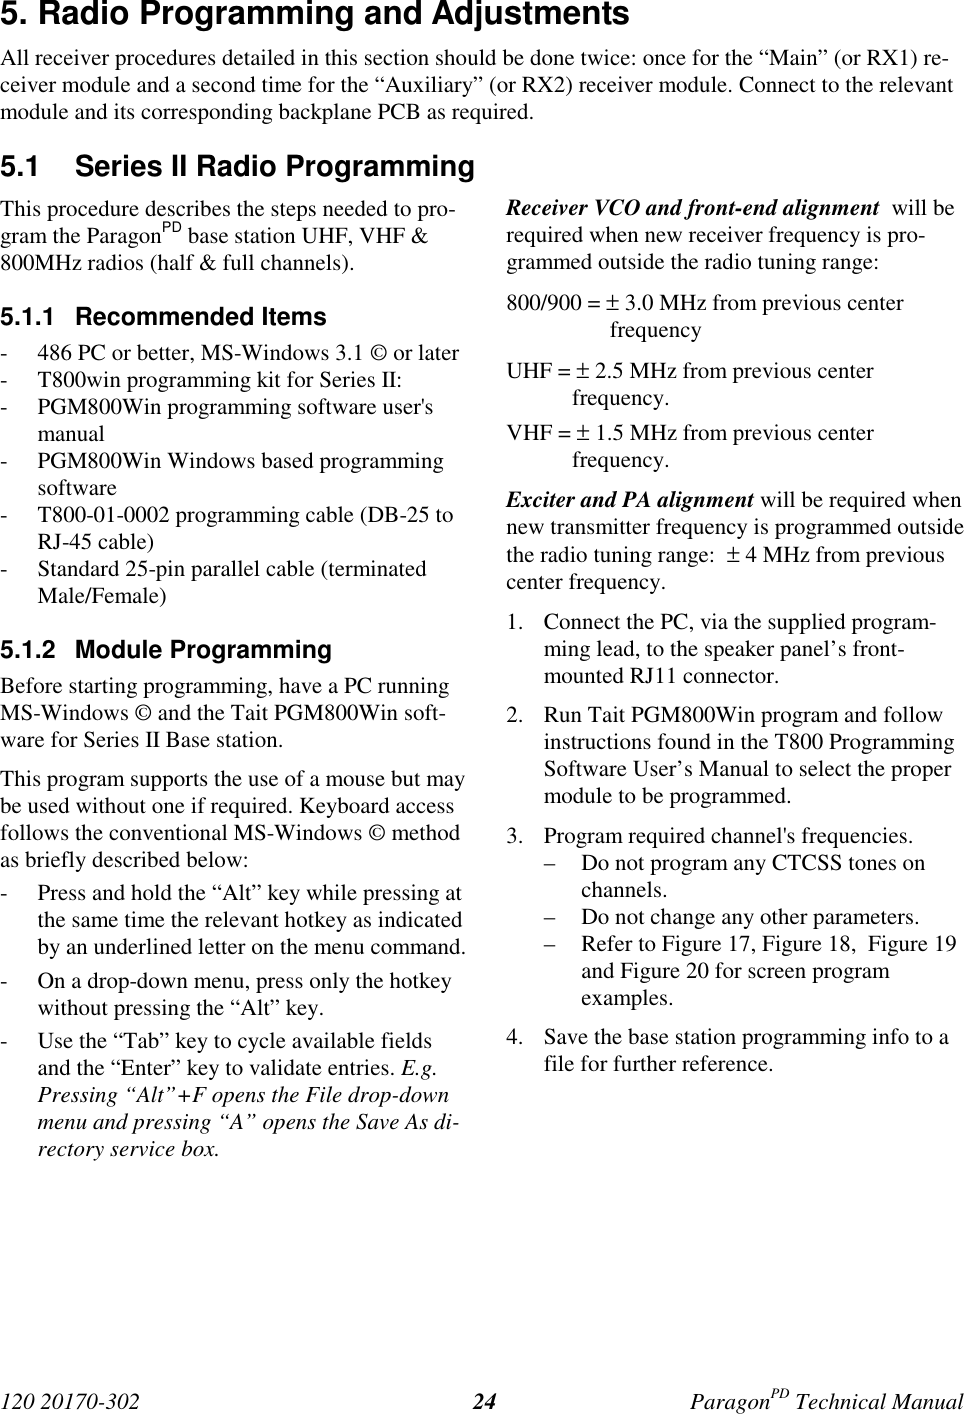 120 20170-302 ParagonPD Technical Manual245. Radio Programming and AdjustmentsAll receiver procedures detailed in this section should be done twice: once for the “Main” (or RX1) re-ceiver module and a second time for the “Auxiliary” (or RX2) receiver module. Connect to the relevantmodule and its corresponding backplane PCB as required.5.1  Series II Radio ProgrammingThis procedure describes the steps needed to pro-gram the ParagonPD base station UHF, VHF &amp;800MHz radios (half &amp; full channels).5.1.1 Recommended Items- 486 PC or better, MS-Windows 3.1 © or later- T800win programming kit for Series II:- PGM800Win programming software user&apos;smanual- PGM800Win Windows based programmingsoftware- T800-01-0002 programming cable (DB-25 toRJ-45 cable)- Standard 25-pin parallel cable (terminatedMale/Female)5.1.2 Module ProgrammingBefore starting programming, have a PC runningMS-Windows © and the Tait PGM800Win soft-ware for Series II Base station.This program supports the use of a mouse but maybe used without one if required. Keyboard accessfollows the conventional MS-Windows © methodas briefly described below:- Press and hold the “Alt” key while pressing atthe same time the relevant hotkey as indicatedby an underlined letter on the menu command.- On a drop-down menu, press only the hotkeywithout pressing the “Alt” key.- Use the “Tab” key to cycle available fieldsand the “Enter” key to validate entries. E.g.Pressing “Alt”+F opens the File drop-downmenu and pressing “A” opens the Save As di-rectory service box.Receiver VCO and front-end alignment  will berequired when new receiver frequency is pro-grammed outside the radio tuning range:800/900 = ± 3.0 MHz from previous centerfrequencyUHF = ± 2.5 MHz from previous centerfrequency.VHF = ± 1.5 MHz from previous centerfrequency.Exciter and PA alignment will be required whennew transmitter frequency is programmed outsidethe radio tuning range:  ± 4 MHz from previouscenter frequency.1. Connect the PC, via the supplied program-ming lead, to the speaker panel’s front-mounted RJ11 connector.2. Run Tait PGM800Win program and followinstructions found in the T800 ProgrammingSoftware User’s Manual to select the propermodule to be programmed.3. Program required channel&apos;s frequencies.– Do not program any CTCSS tones onchannels.– Do not change any other parameters.– Refer to Figure 17, Figure 18,  Figure 19and Figure 20 for screen programexamples.4. Save the base station programming info to afile for further reference.